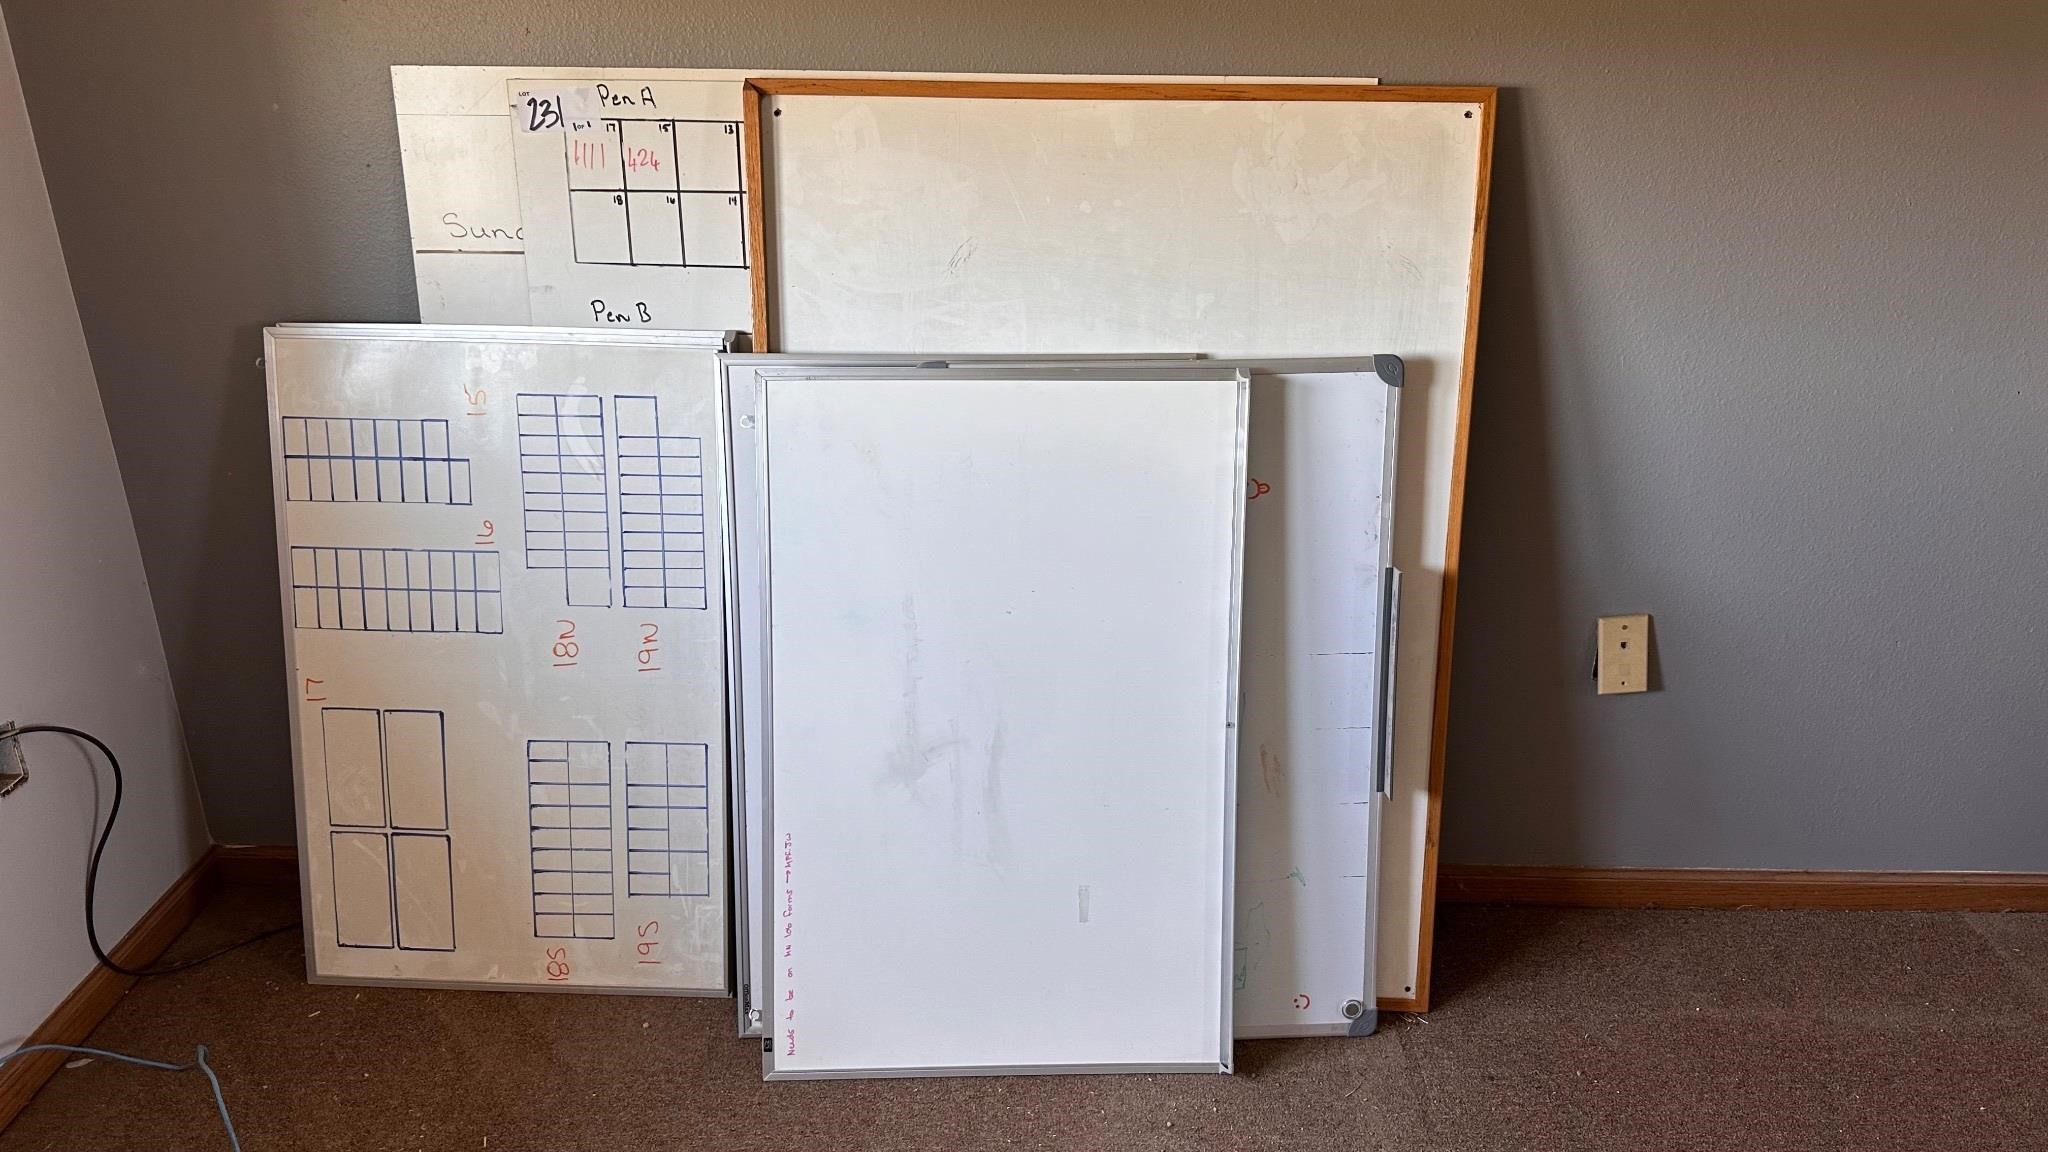 Misc white boards